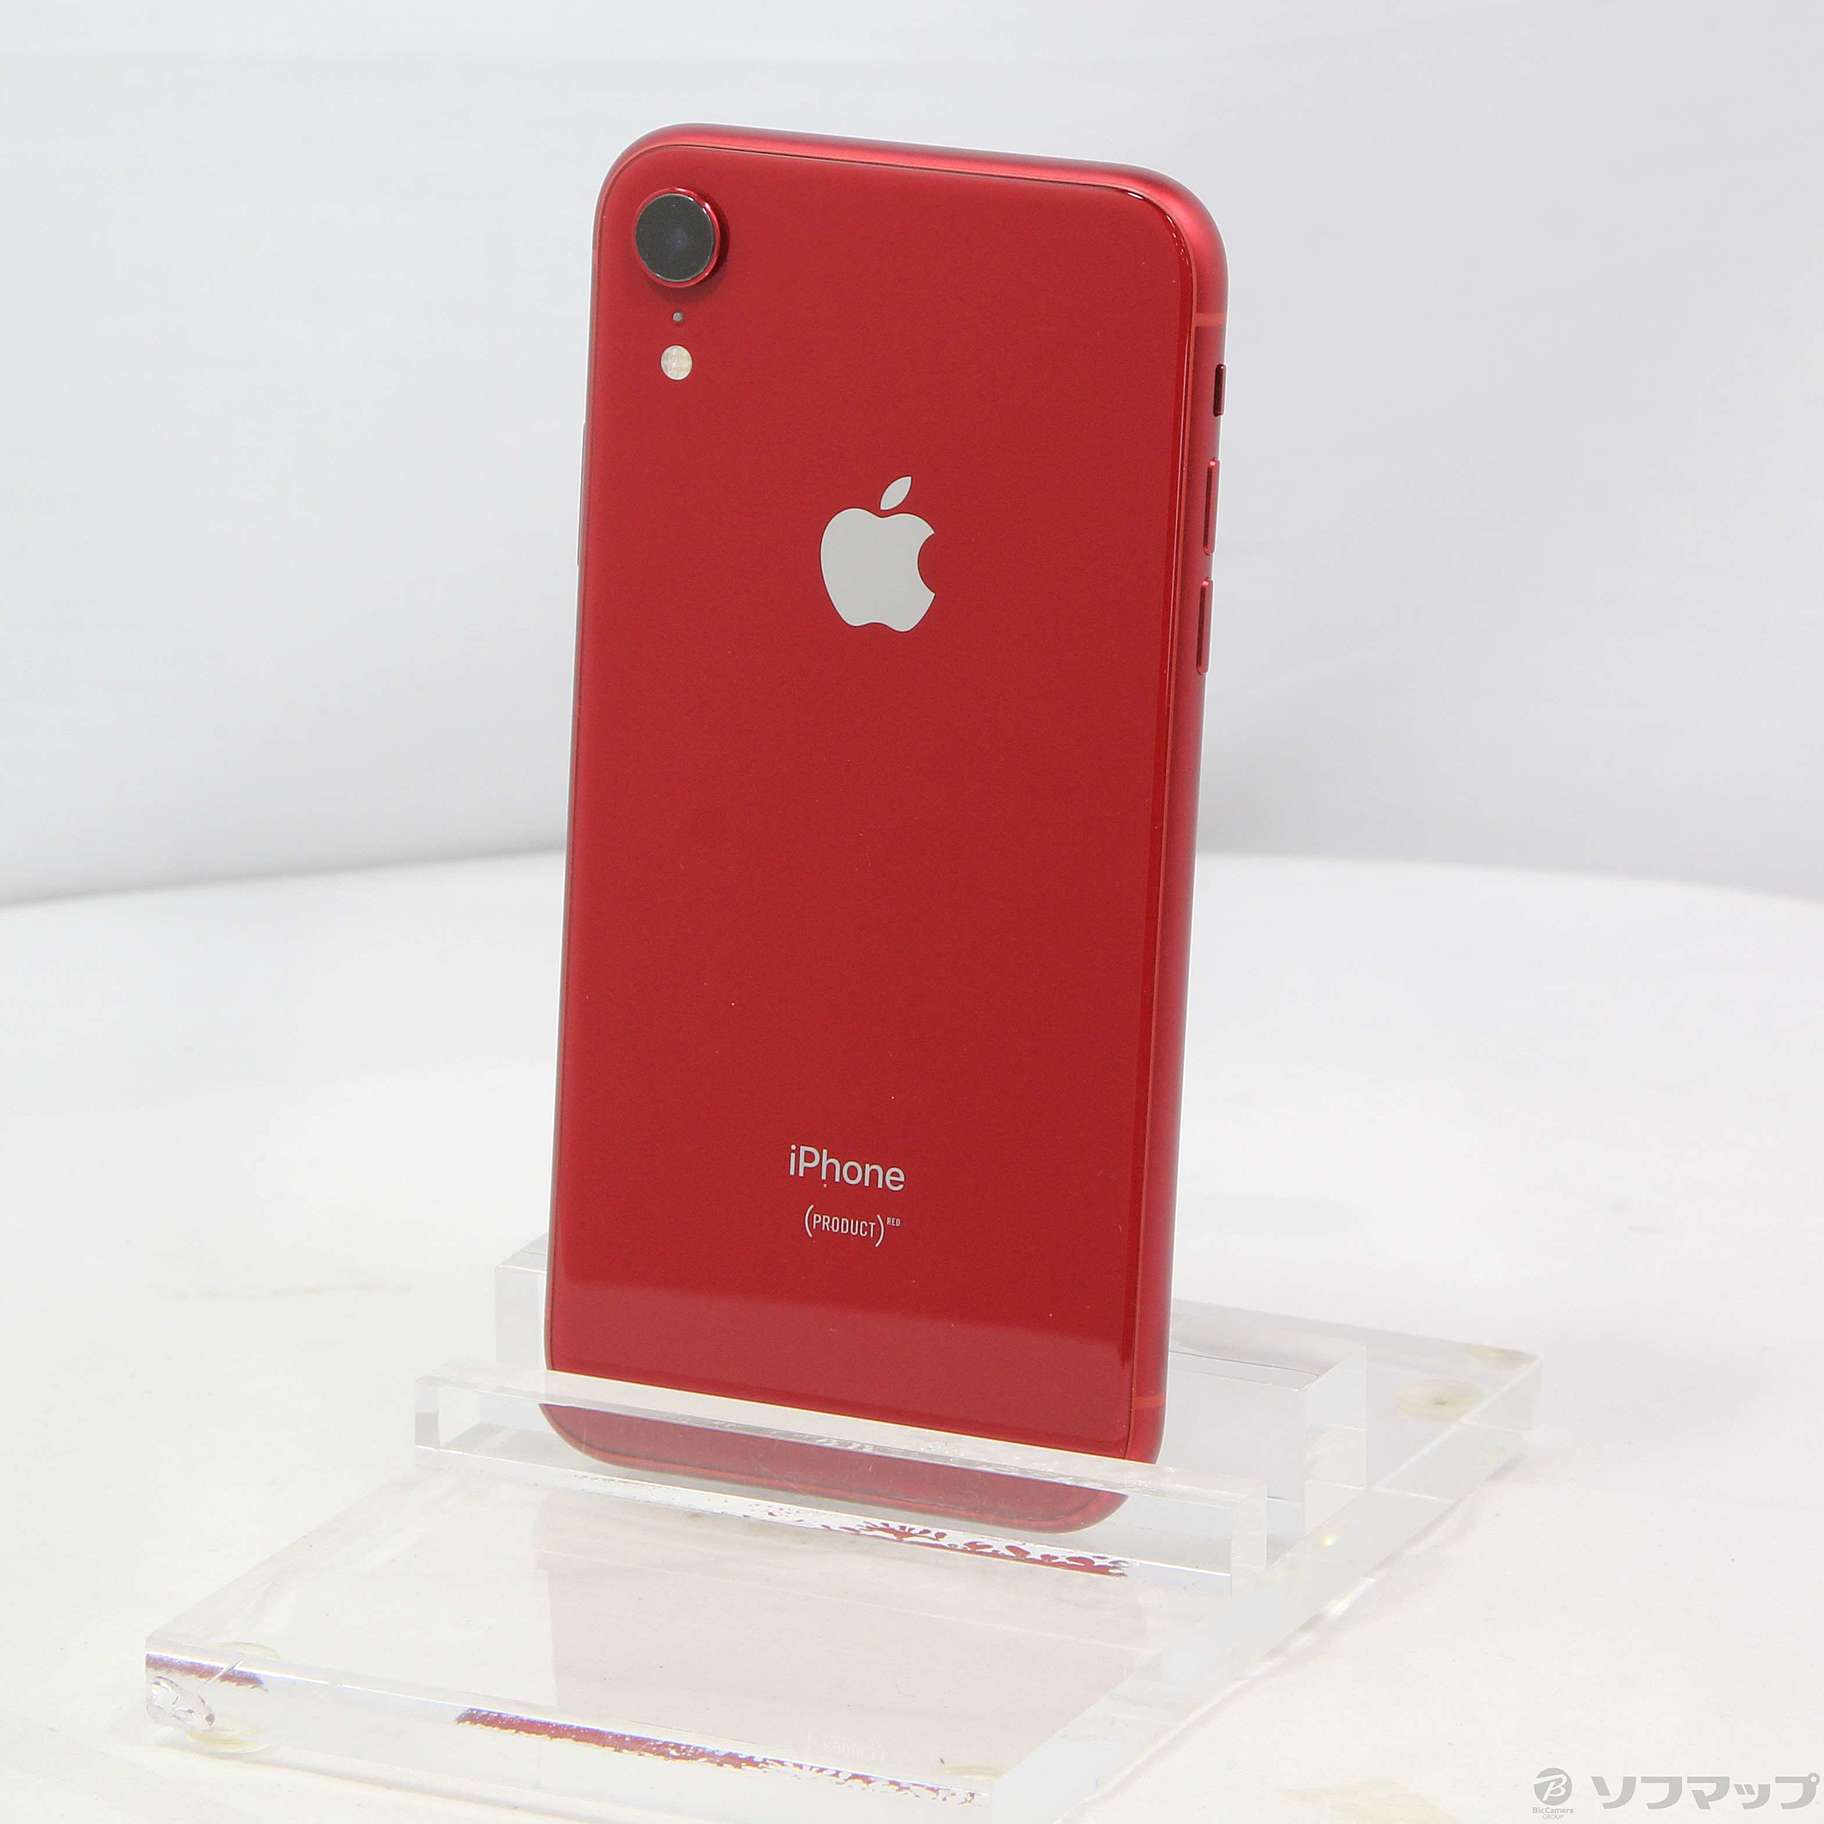 iPhoneXR PRODUCT RED 128G特別SALE - www.joiedevieinteriors.com